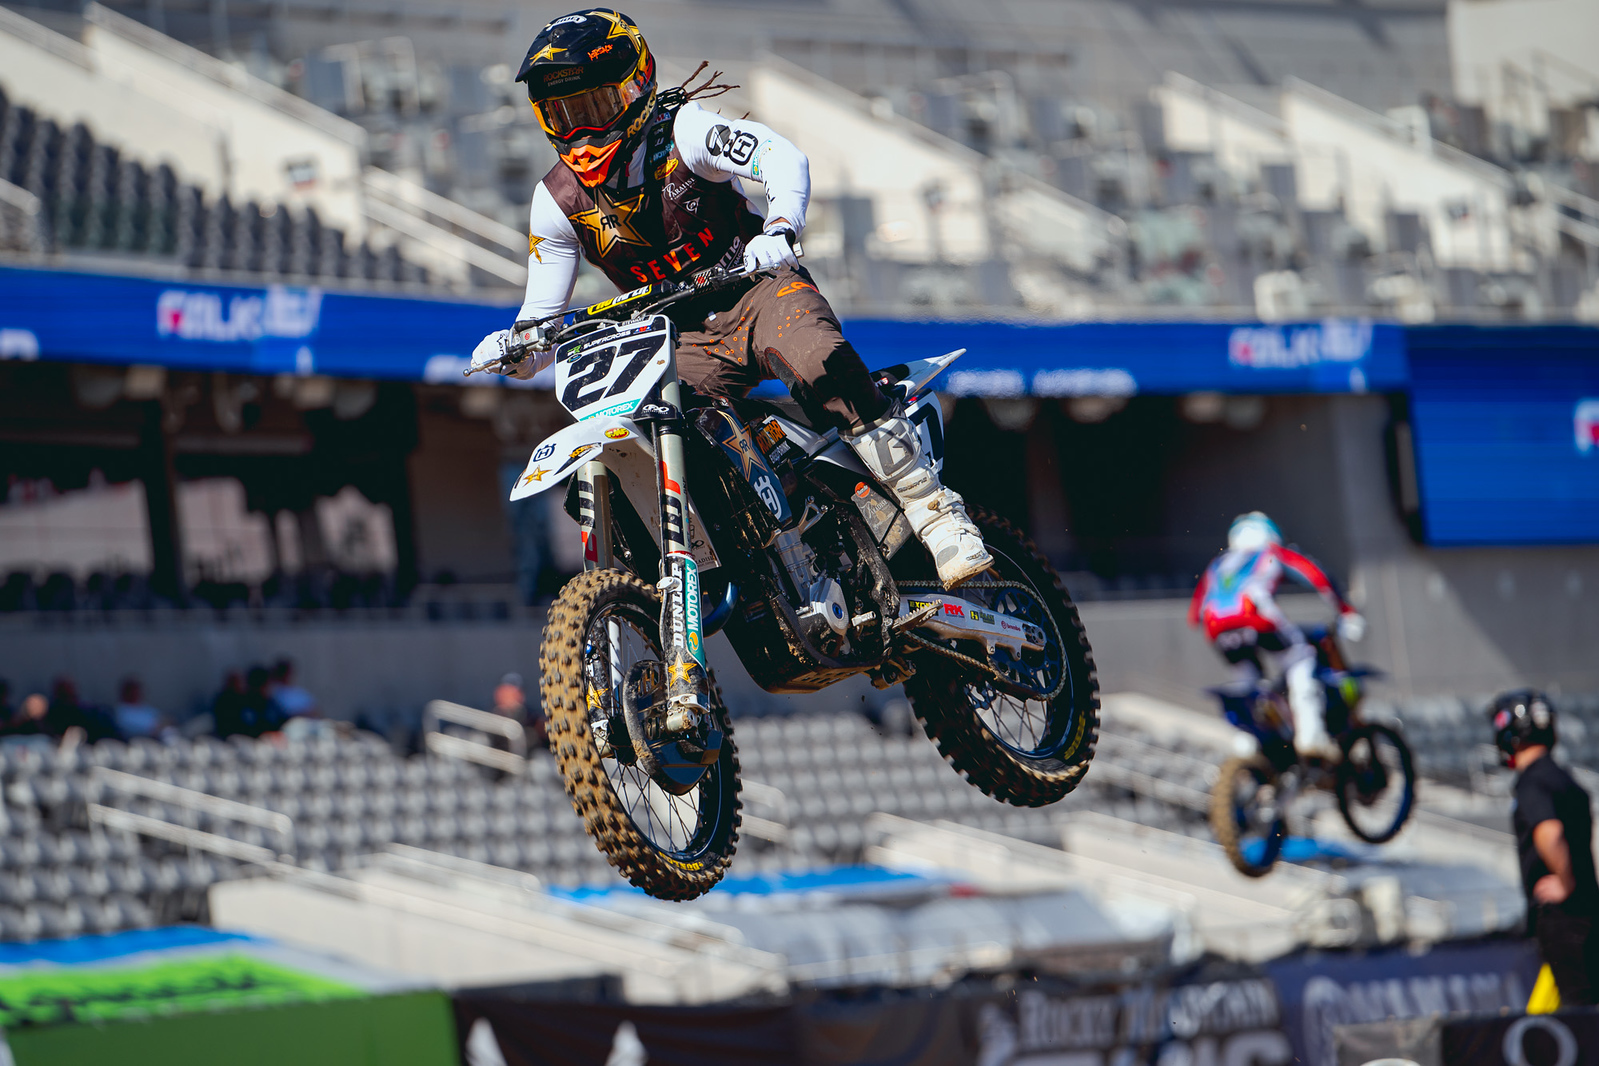 2023 San Diego Supercross Qualifying Report and Times